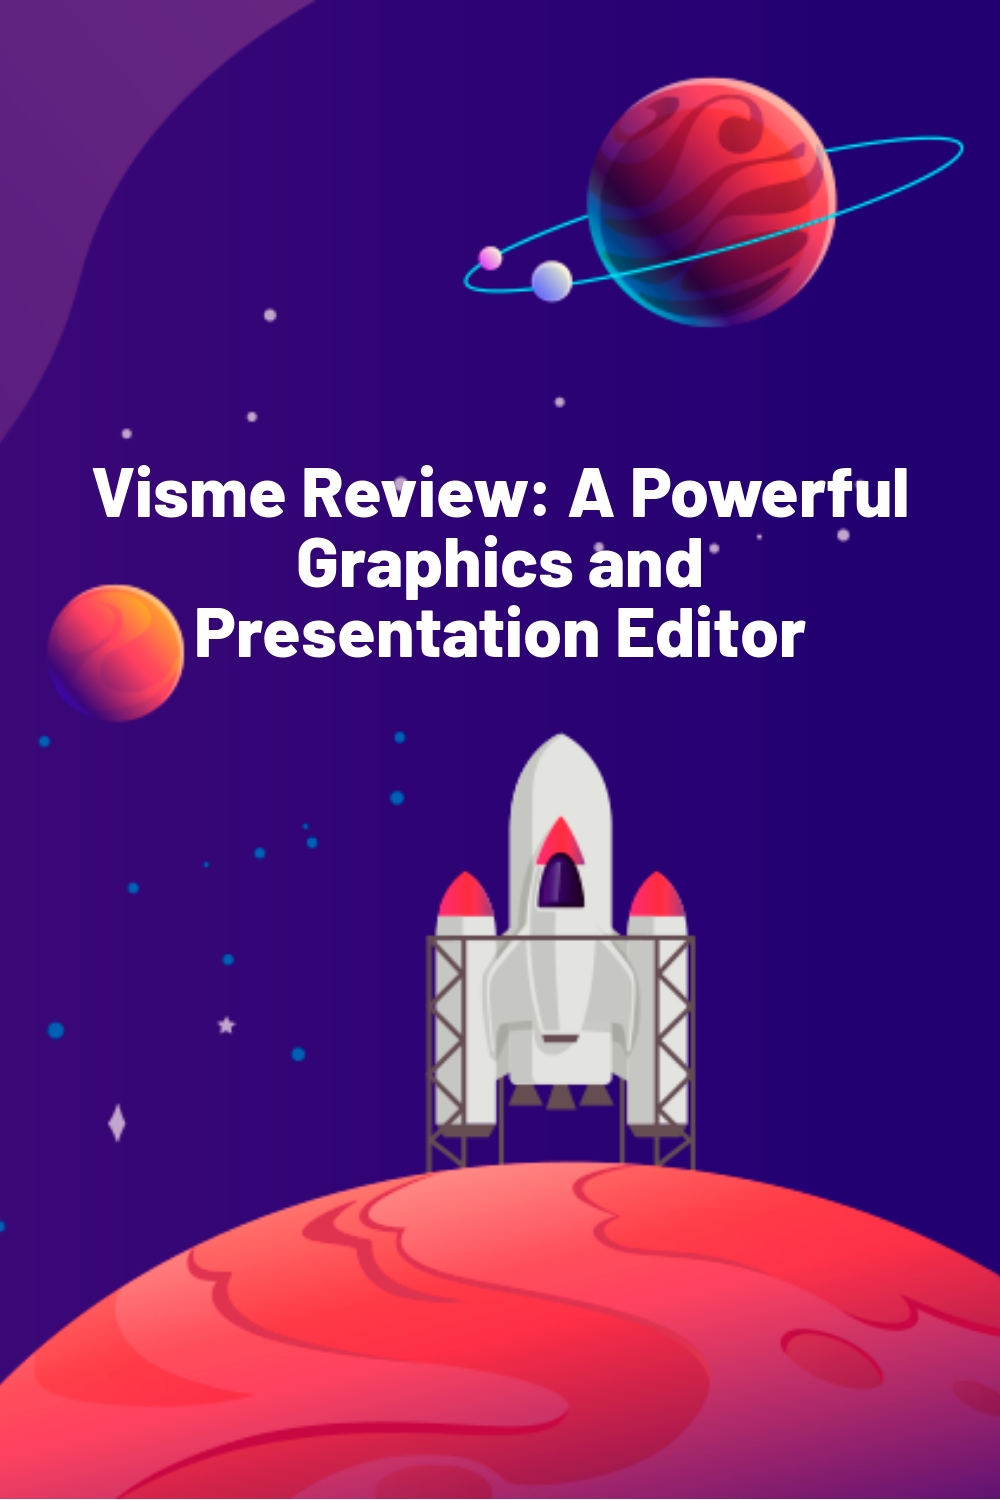 Visme Review: A Powerful Graphics and Presentation Editor